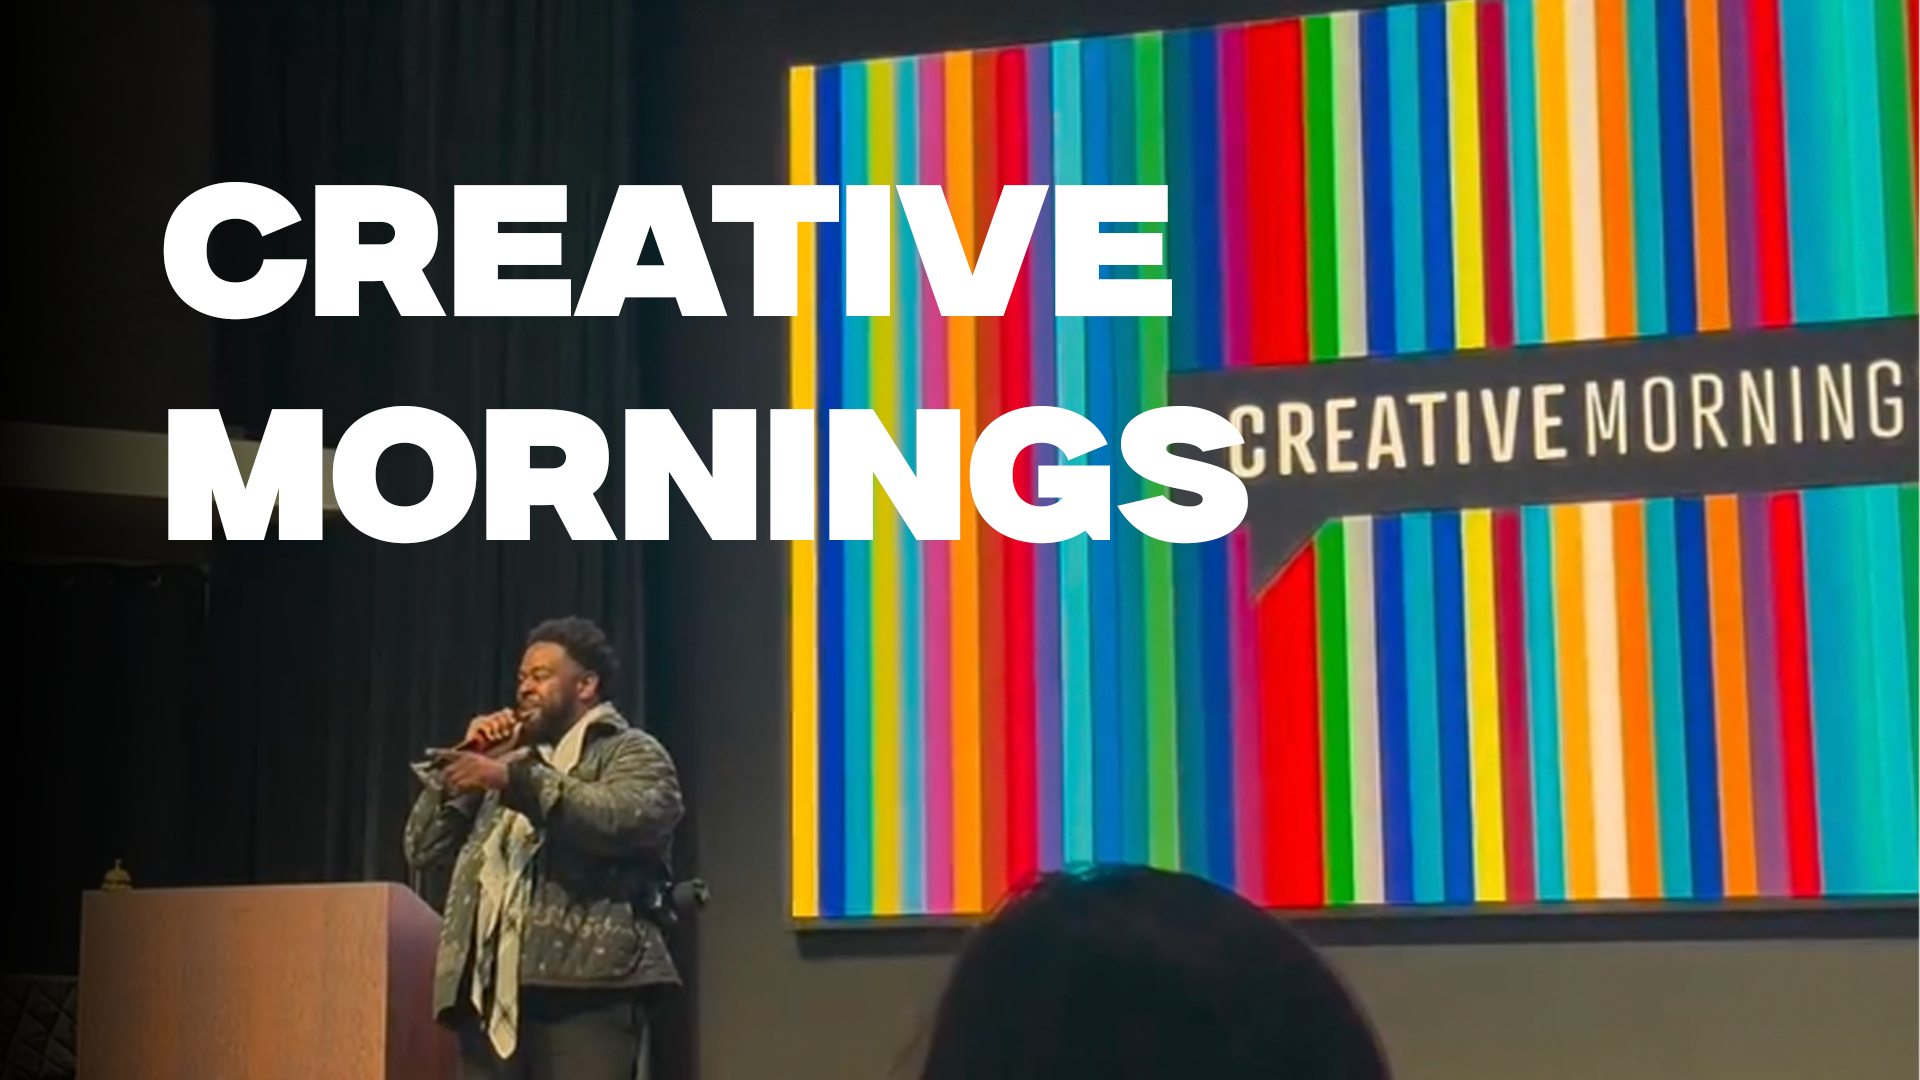 Creative Mornings San Diego: Inspiring Perspectives: A Creative Morning with Frankie Margotta